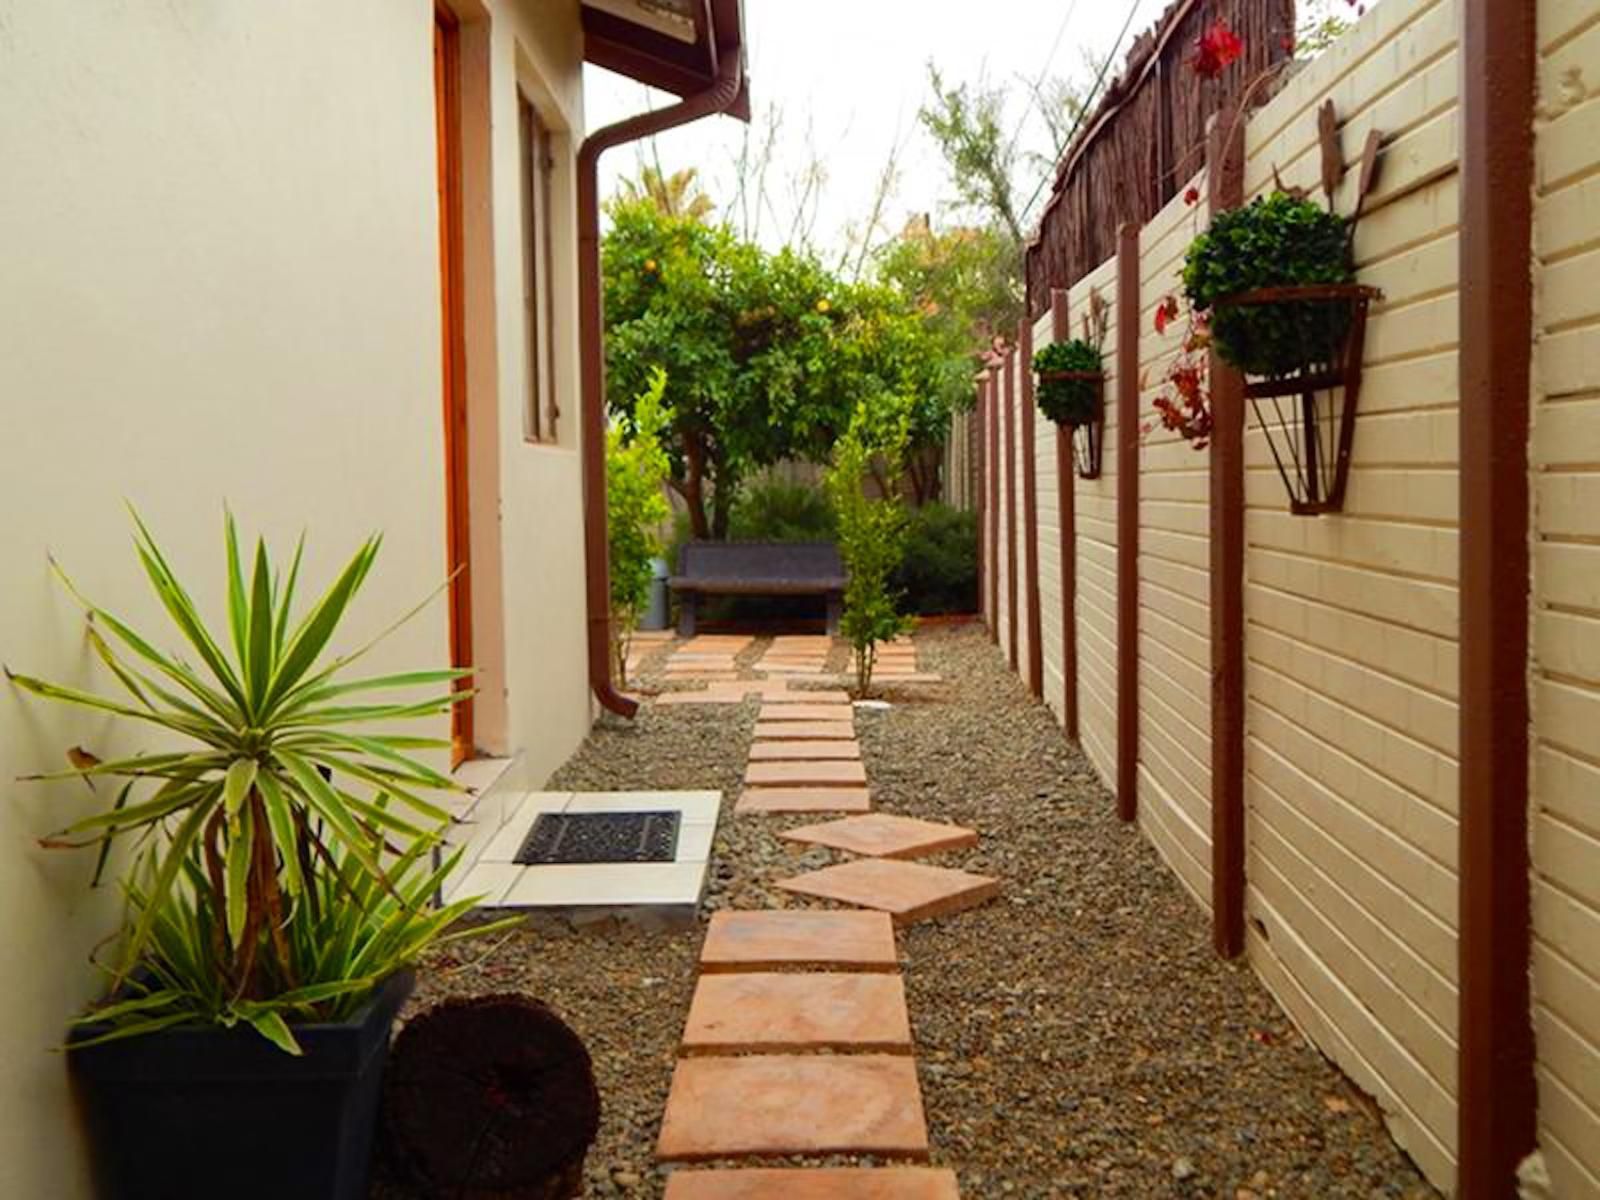 Oak Rest Bed And Breakfast Belgravia Kimberley Northern Cape South Africa House, Building, Architecture, Garden, Nature, Plant